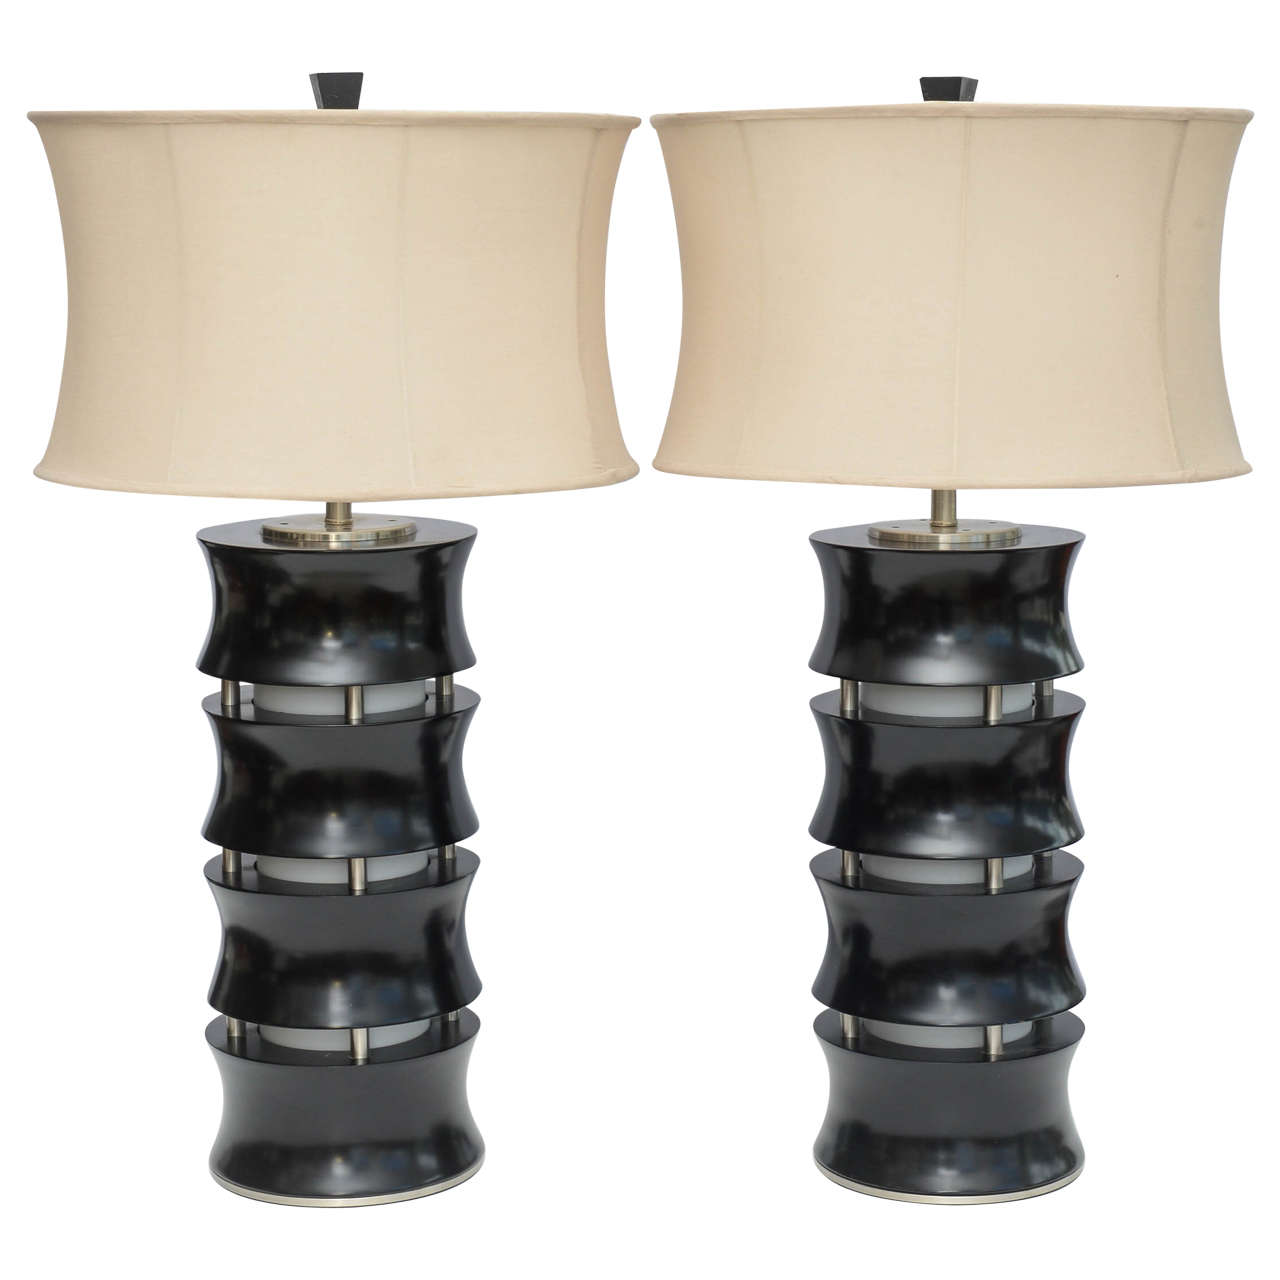 Beautiful Pair of Wooden and Glass MCM table lamps, 1959 America